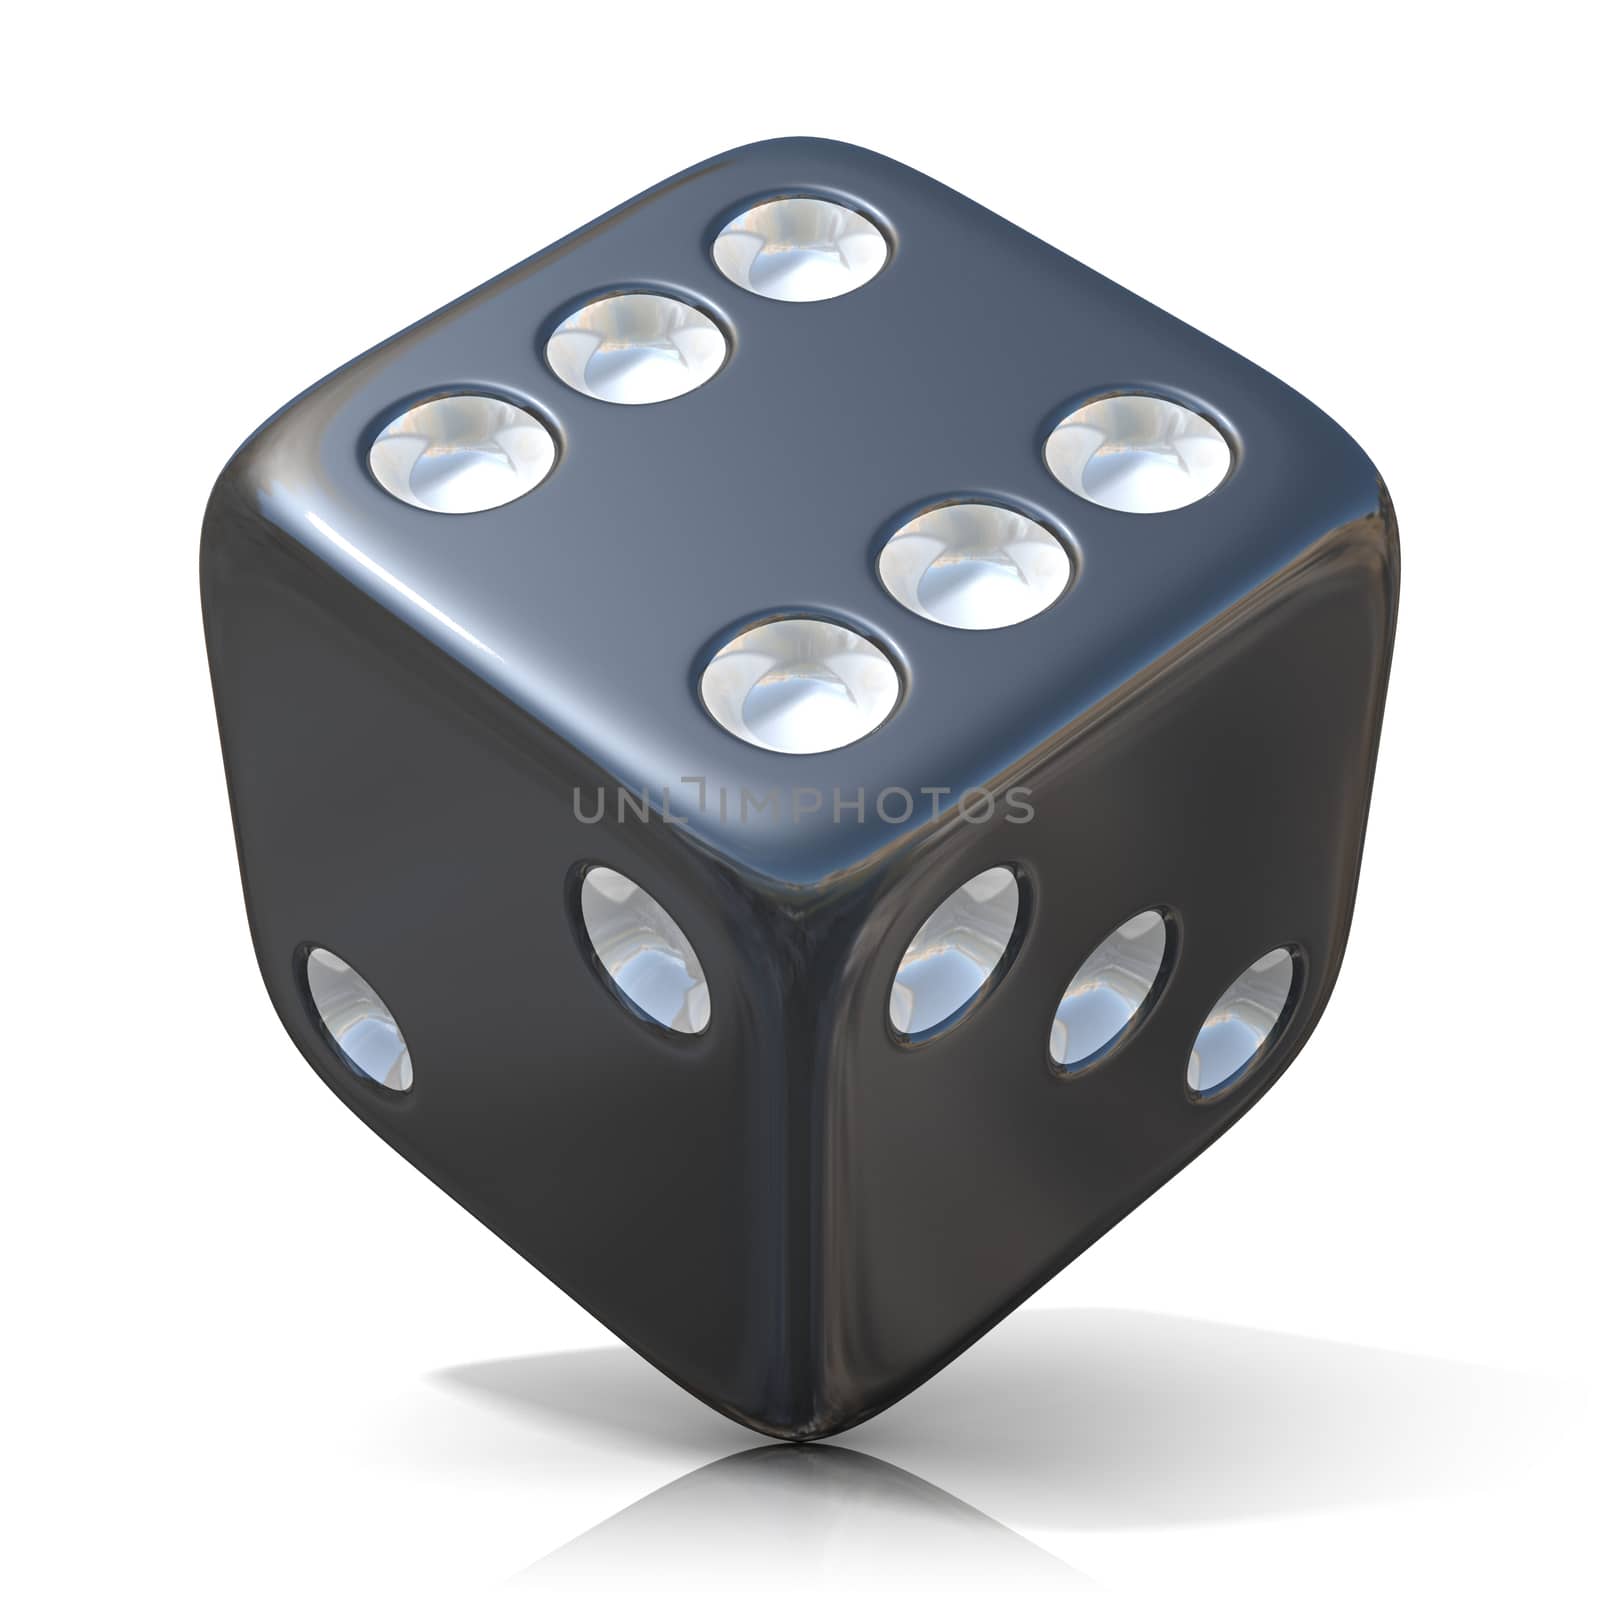 Black game dice isolated on white background